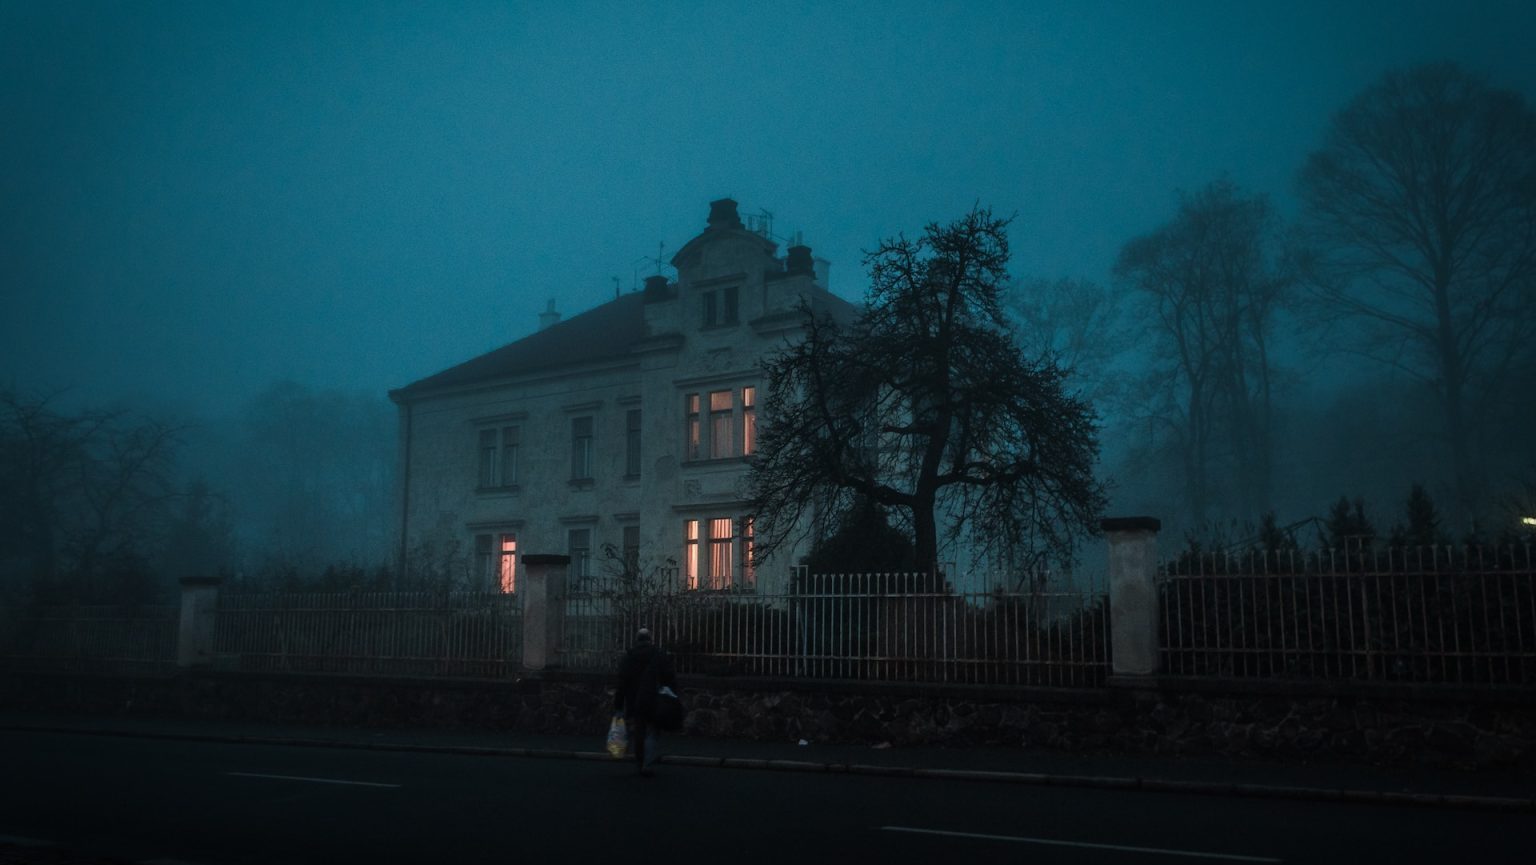 A person walks past a house in the fog.